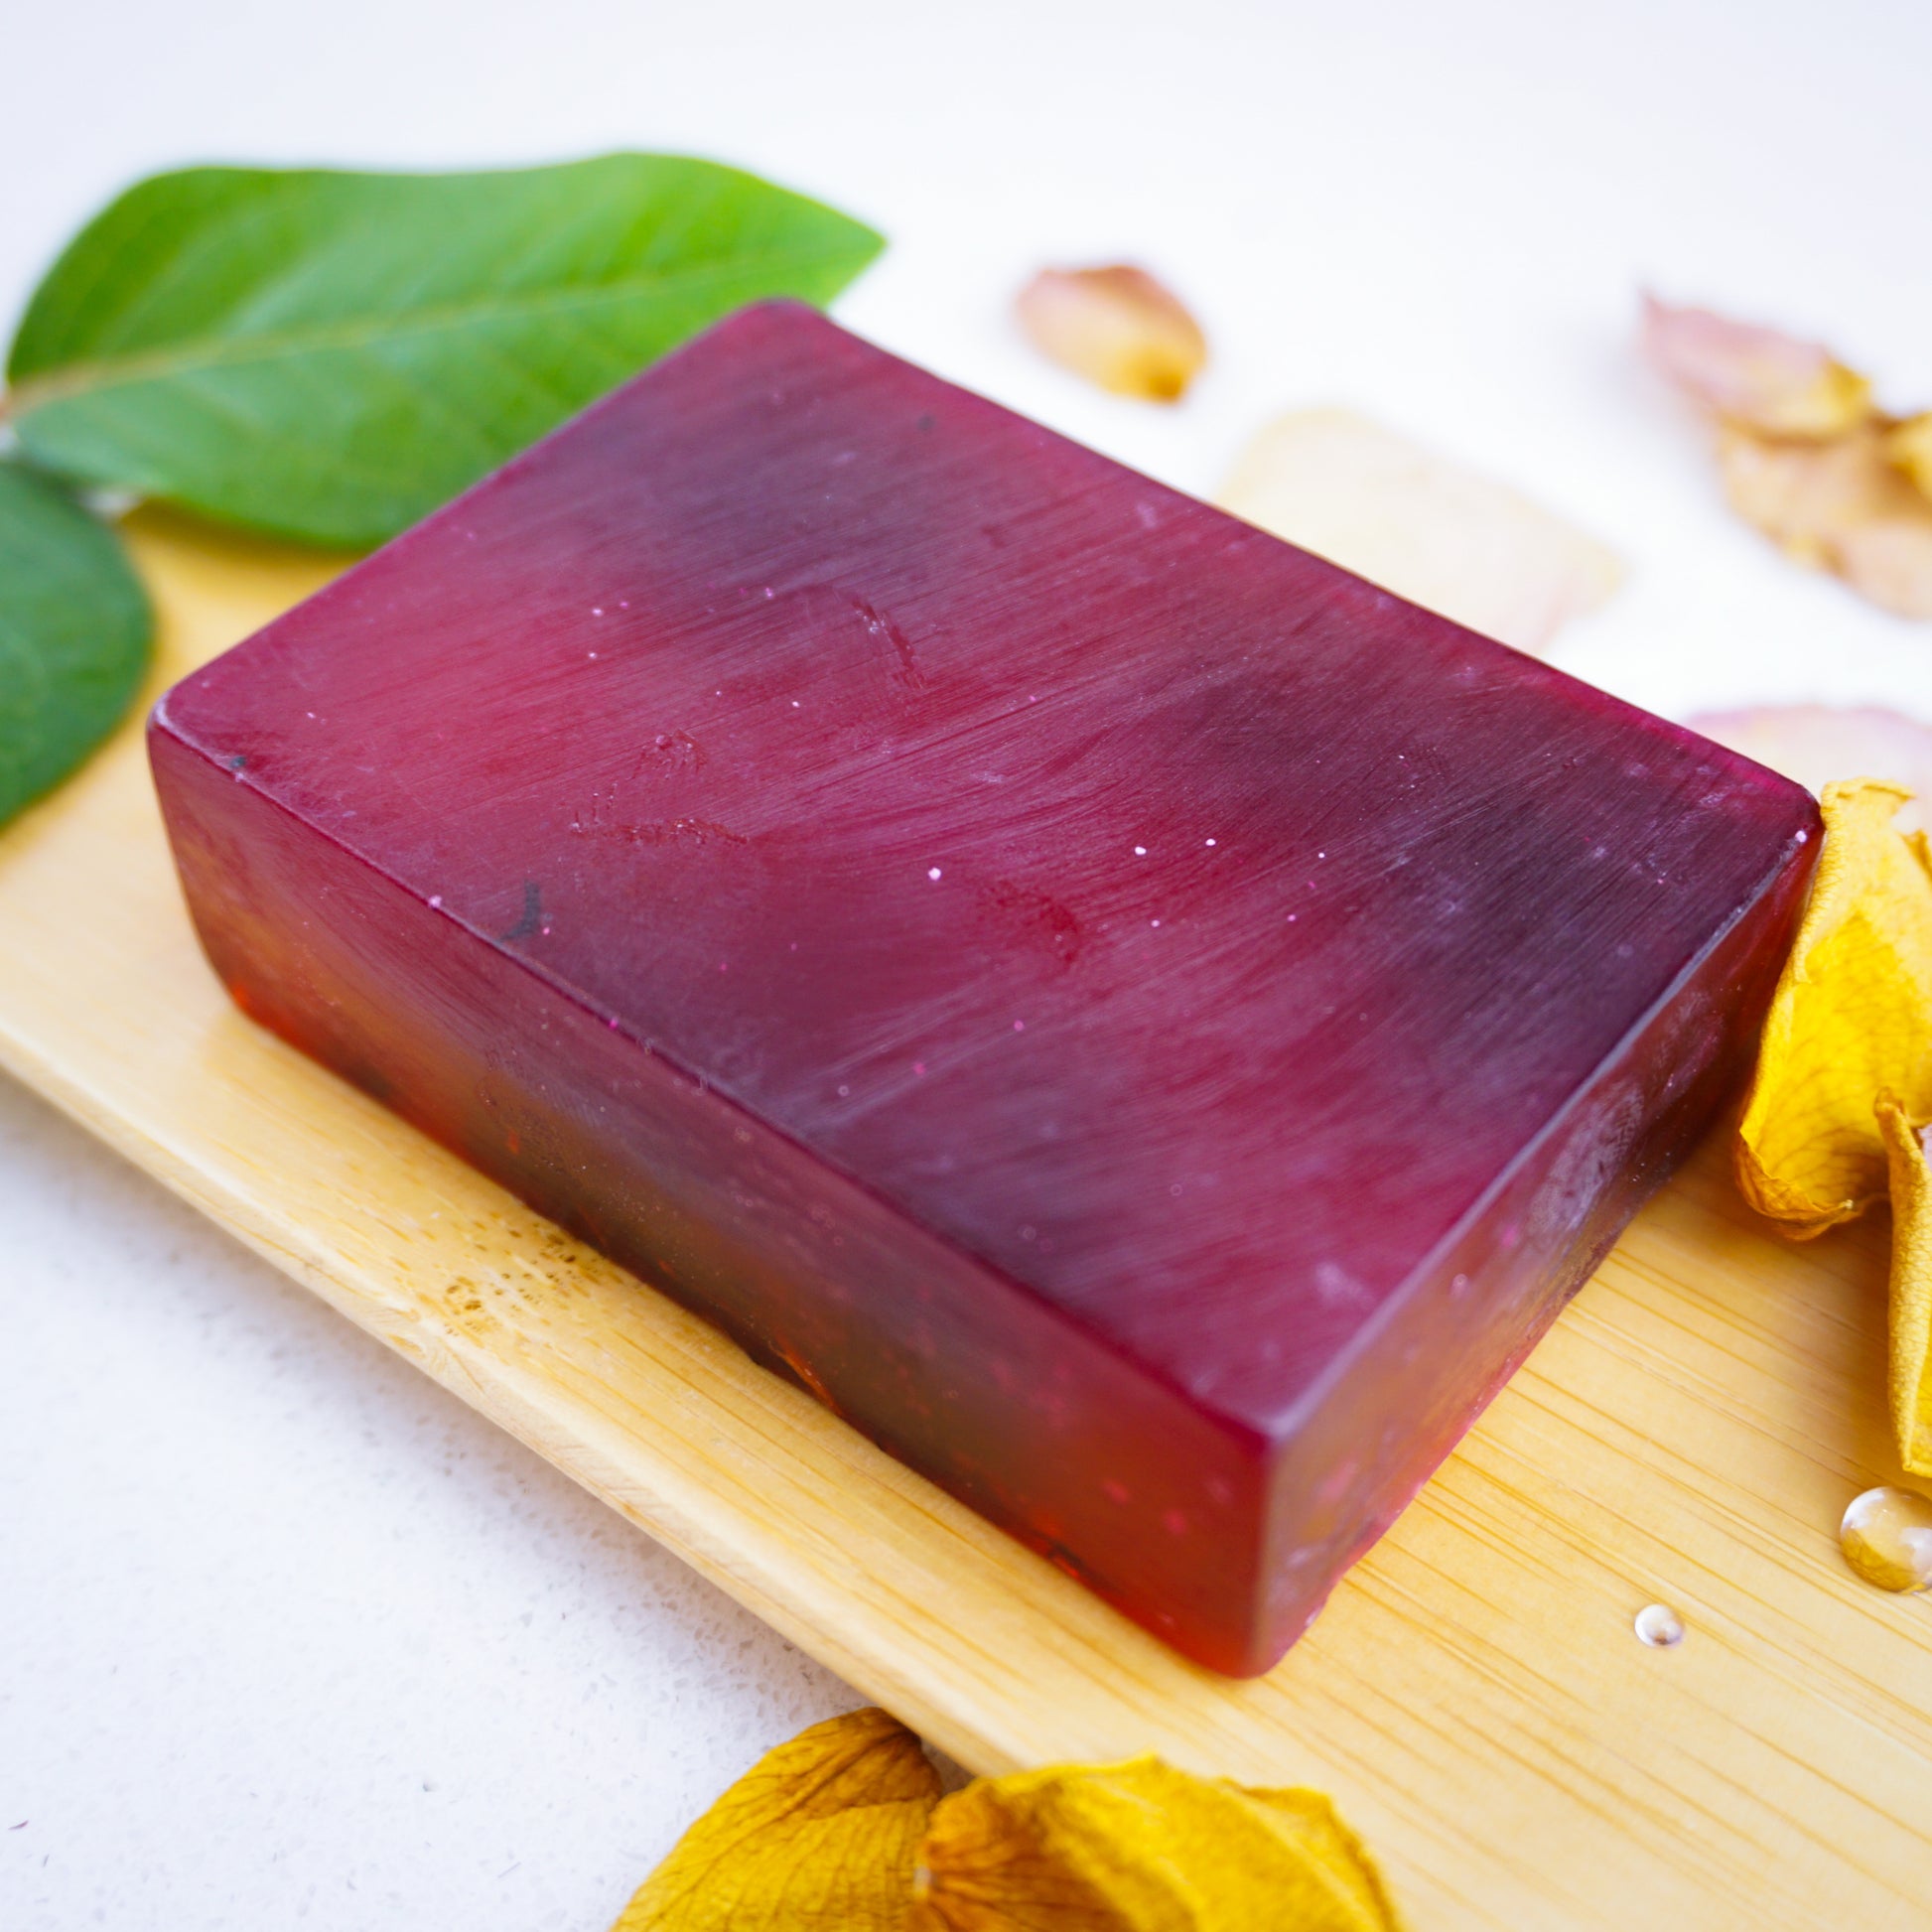 Rose & Ylang soap bar laid flat on bamboo tray with droplets and yellow rose petals